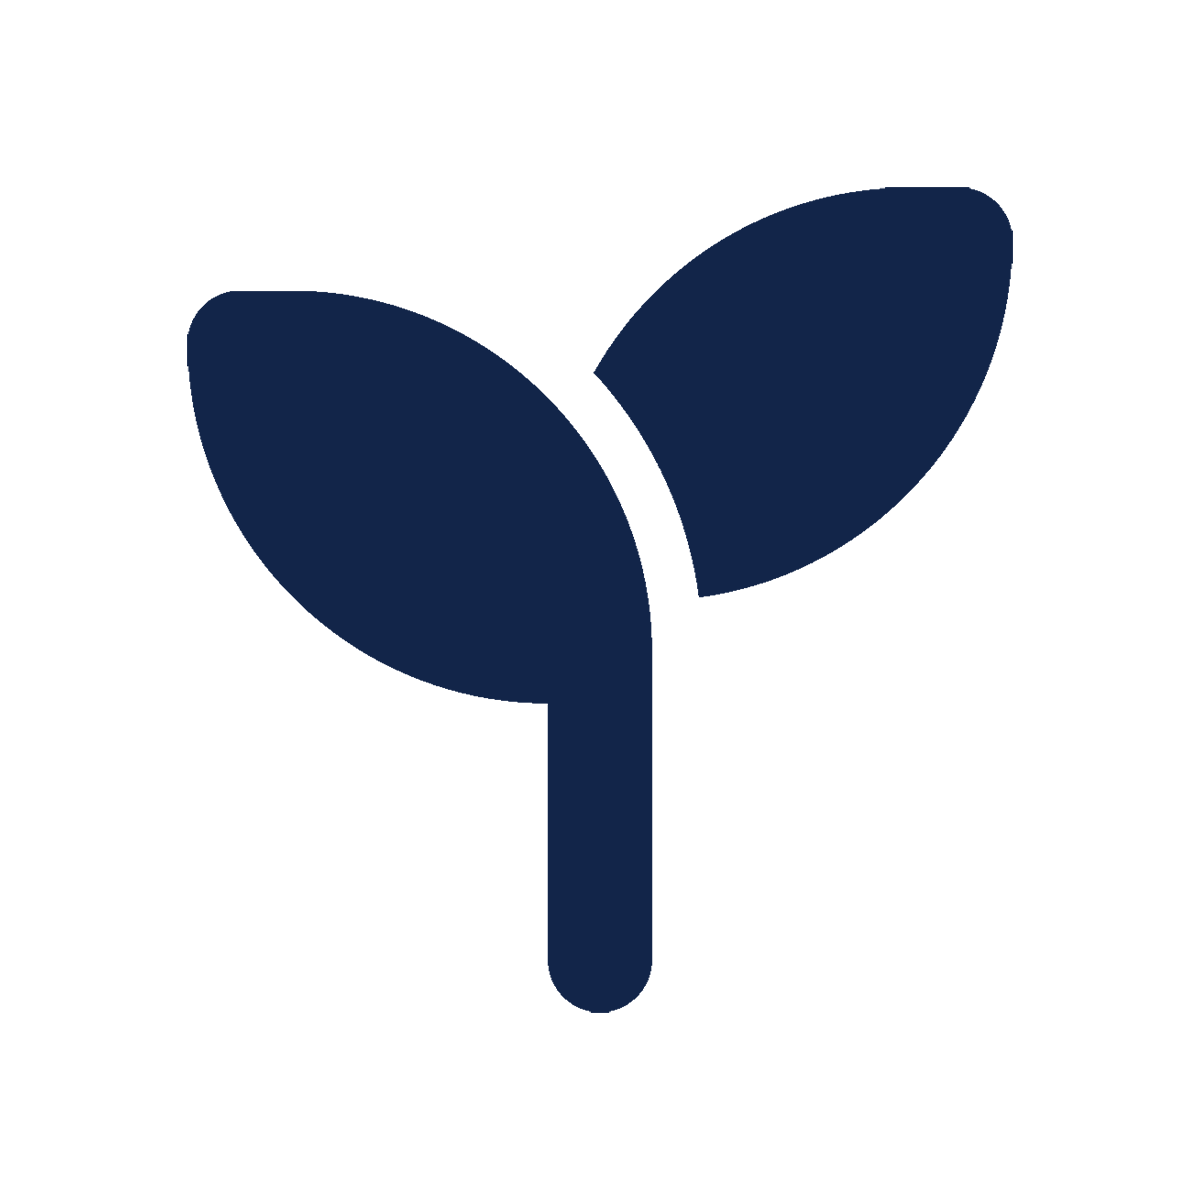 Environment icon depicting seedling